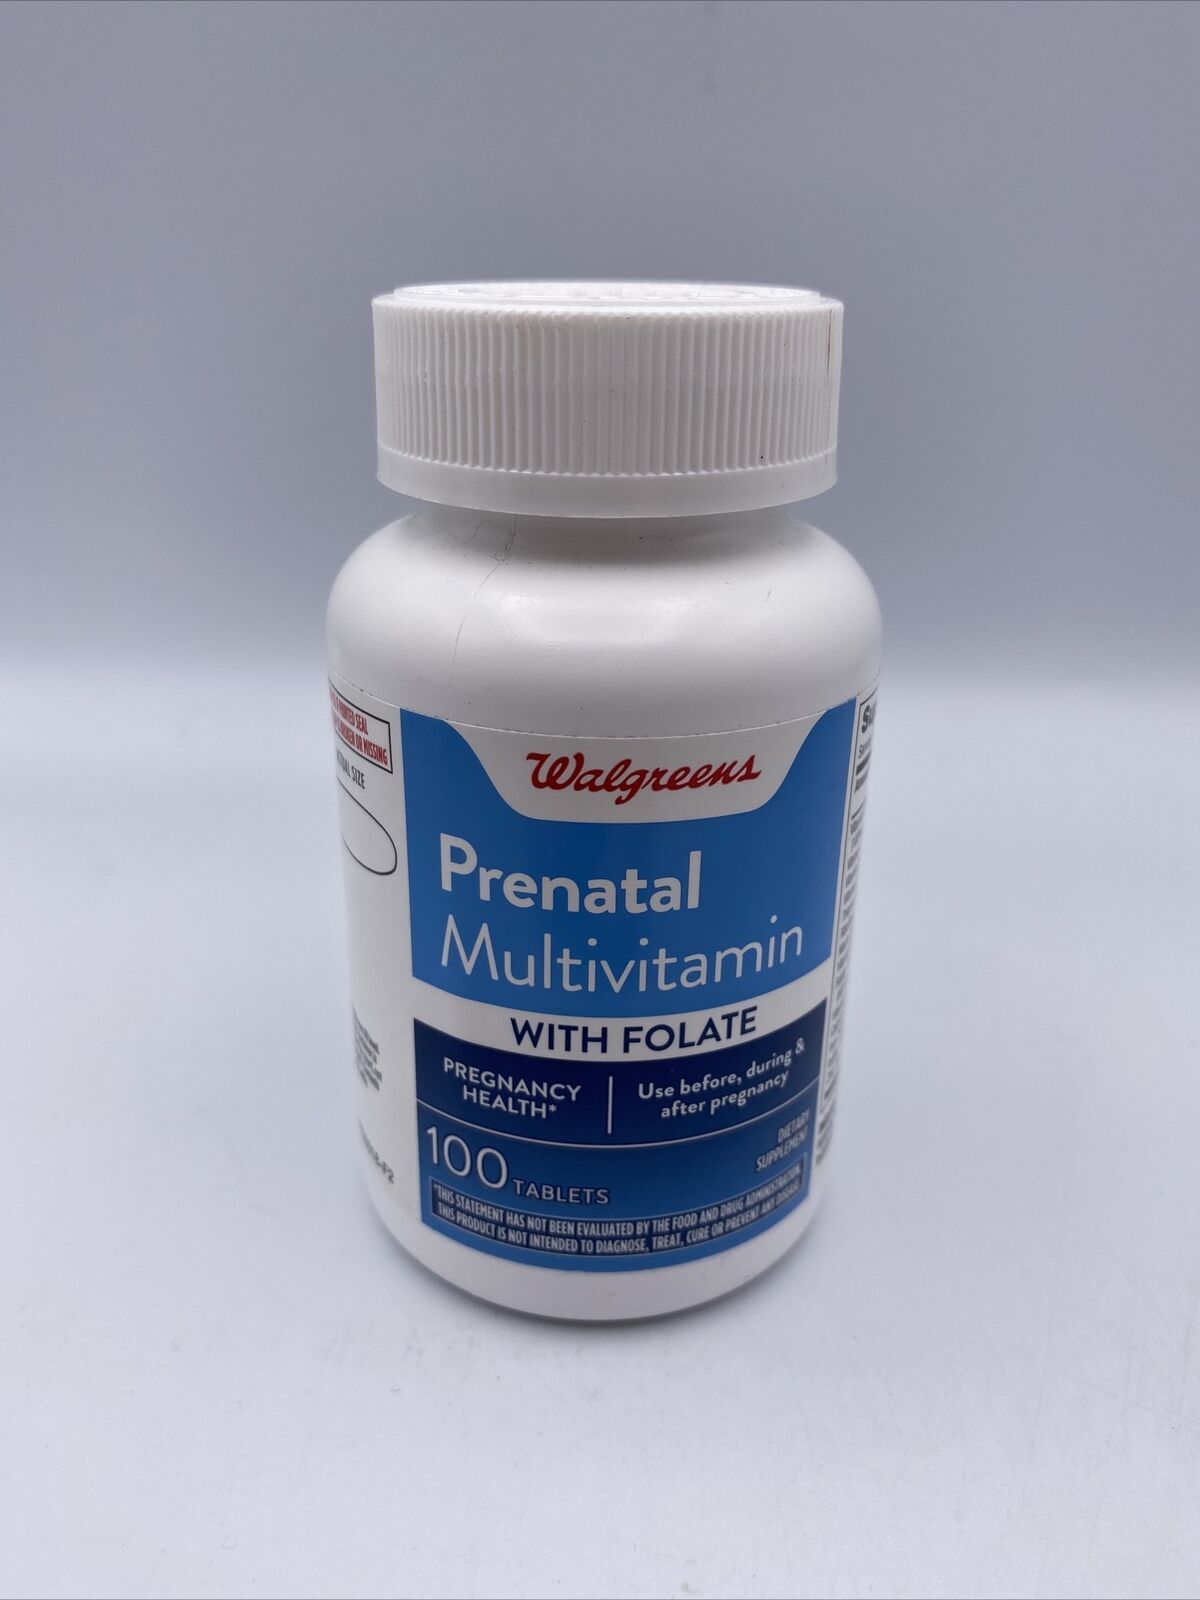 Walgreens Prenatal Multivitamin With Folate 100 Tablets Exp. 03/23 New - $13.06